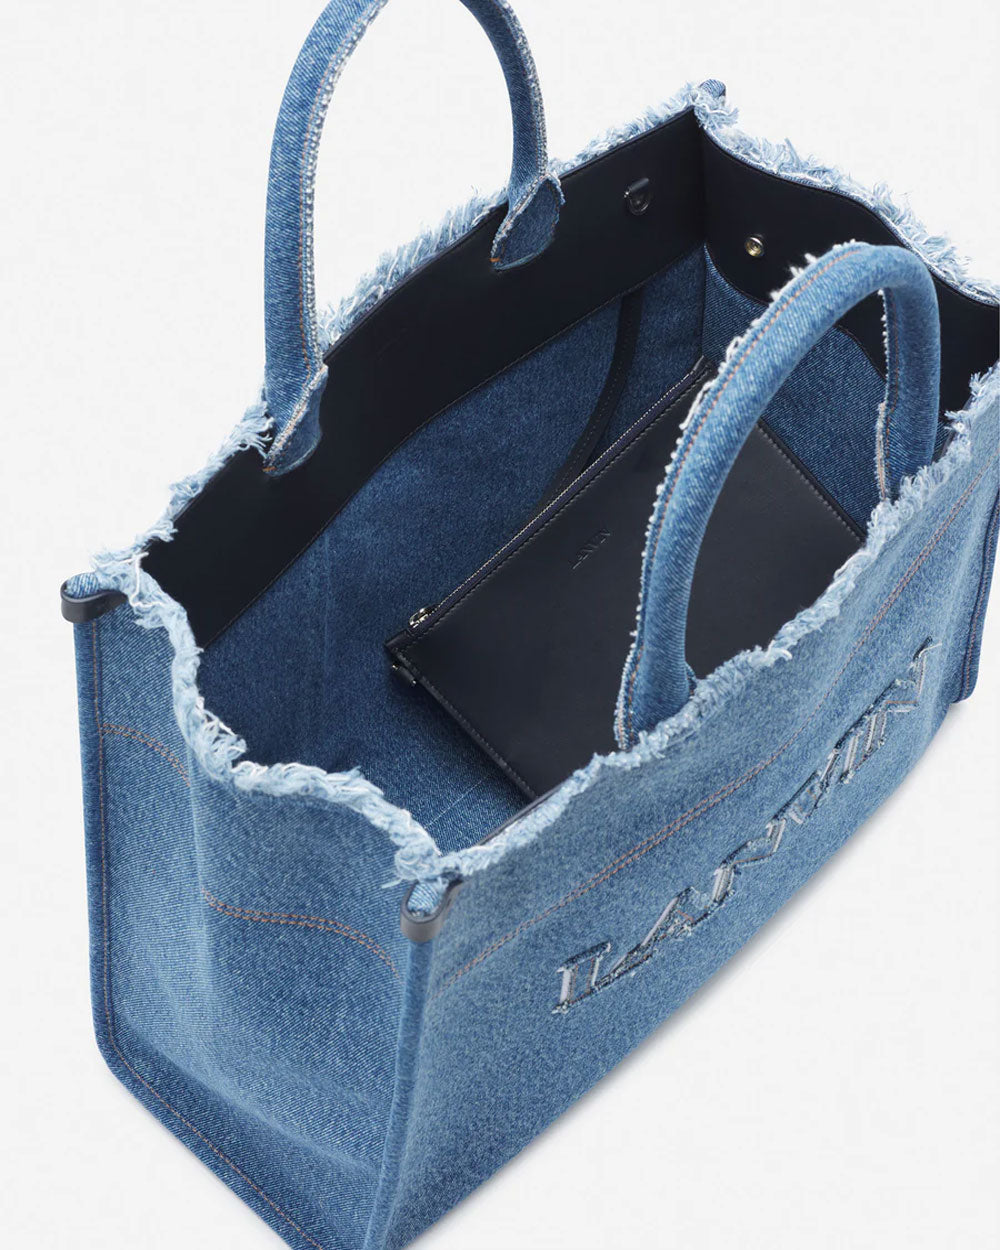 In & Out MM Tote Bag in Denim